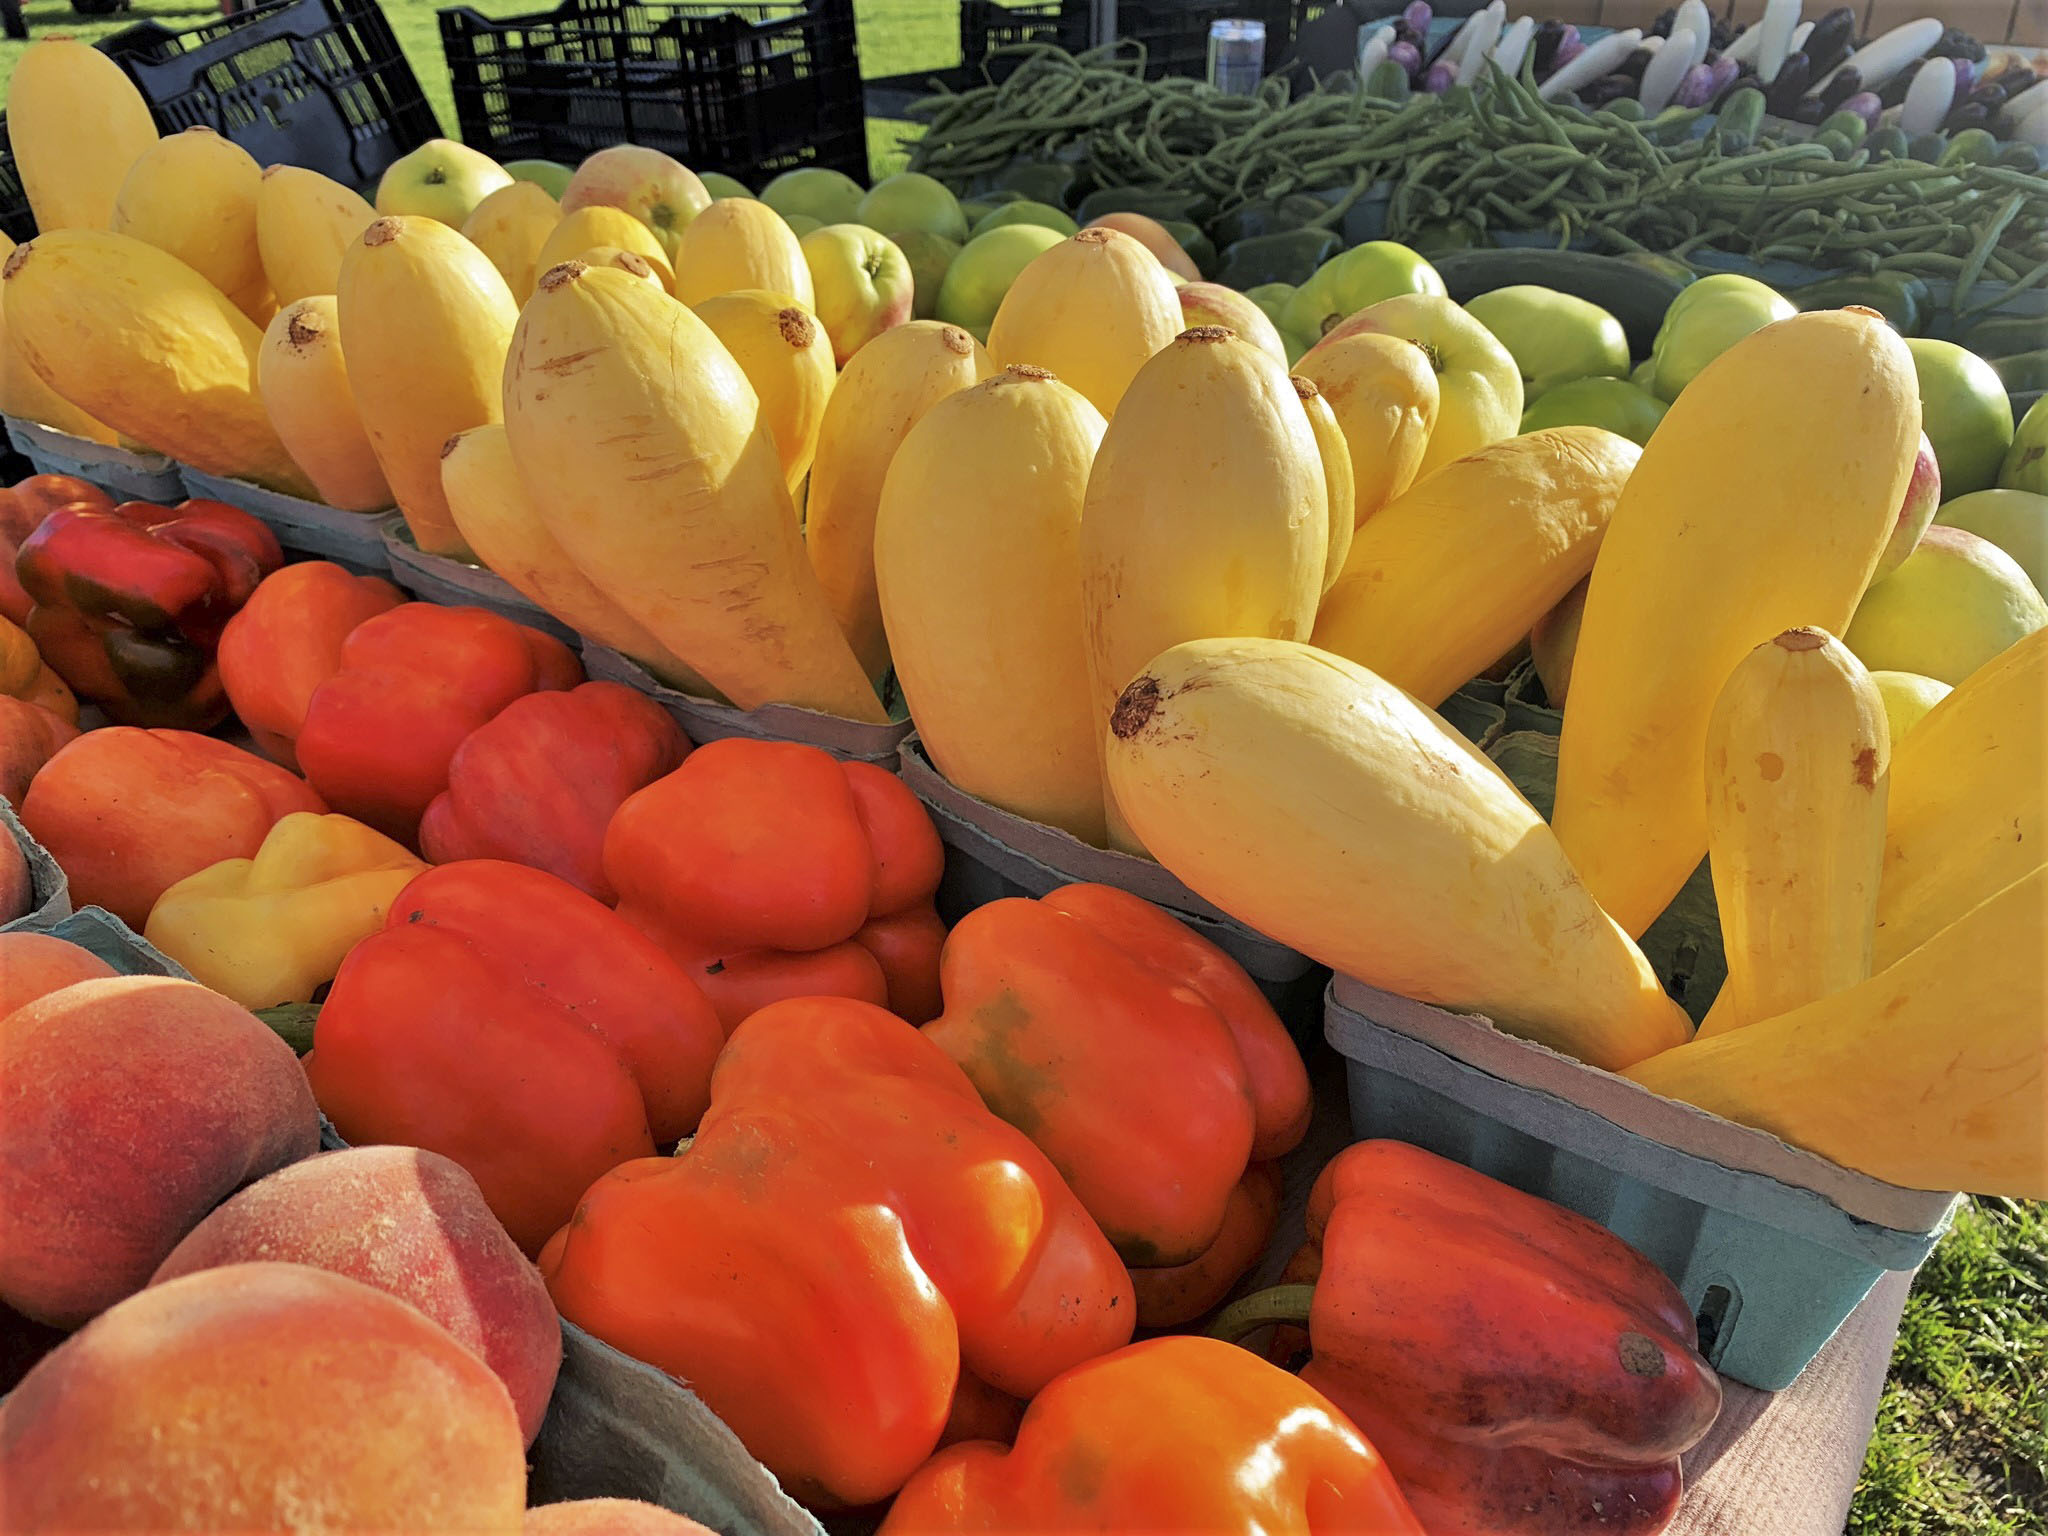 Fruits and vegetables lined up at market